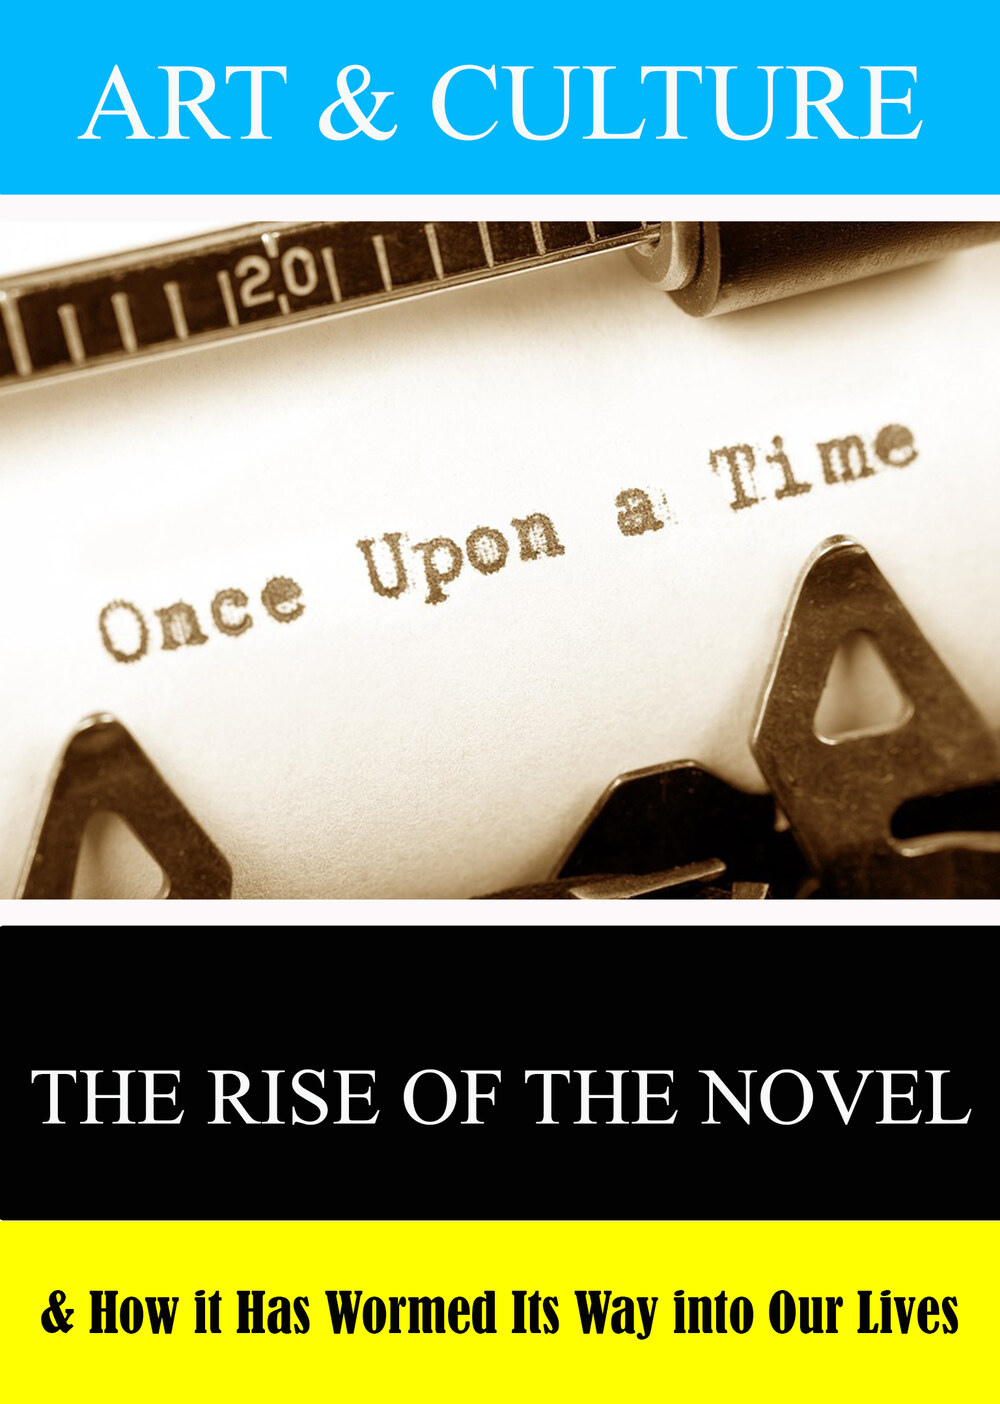 L7938 - Art & Culture: The Rise of the Novel & How it Has Wormed Its Way into Our Lives